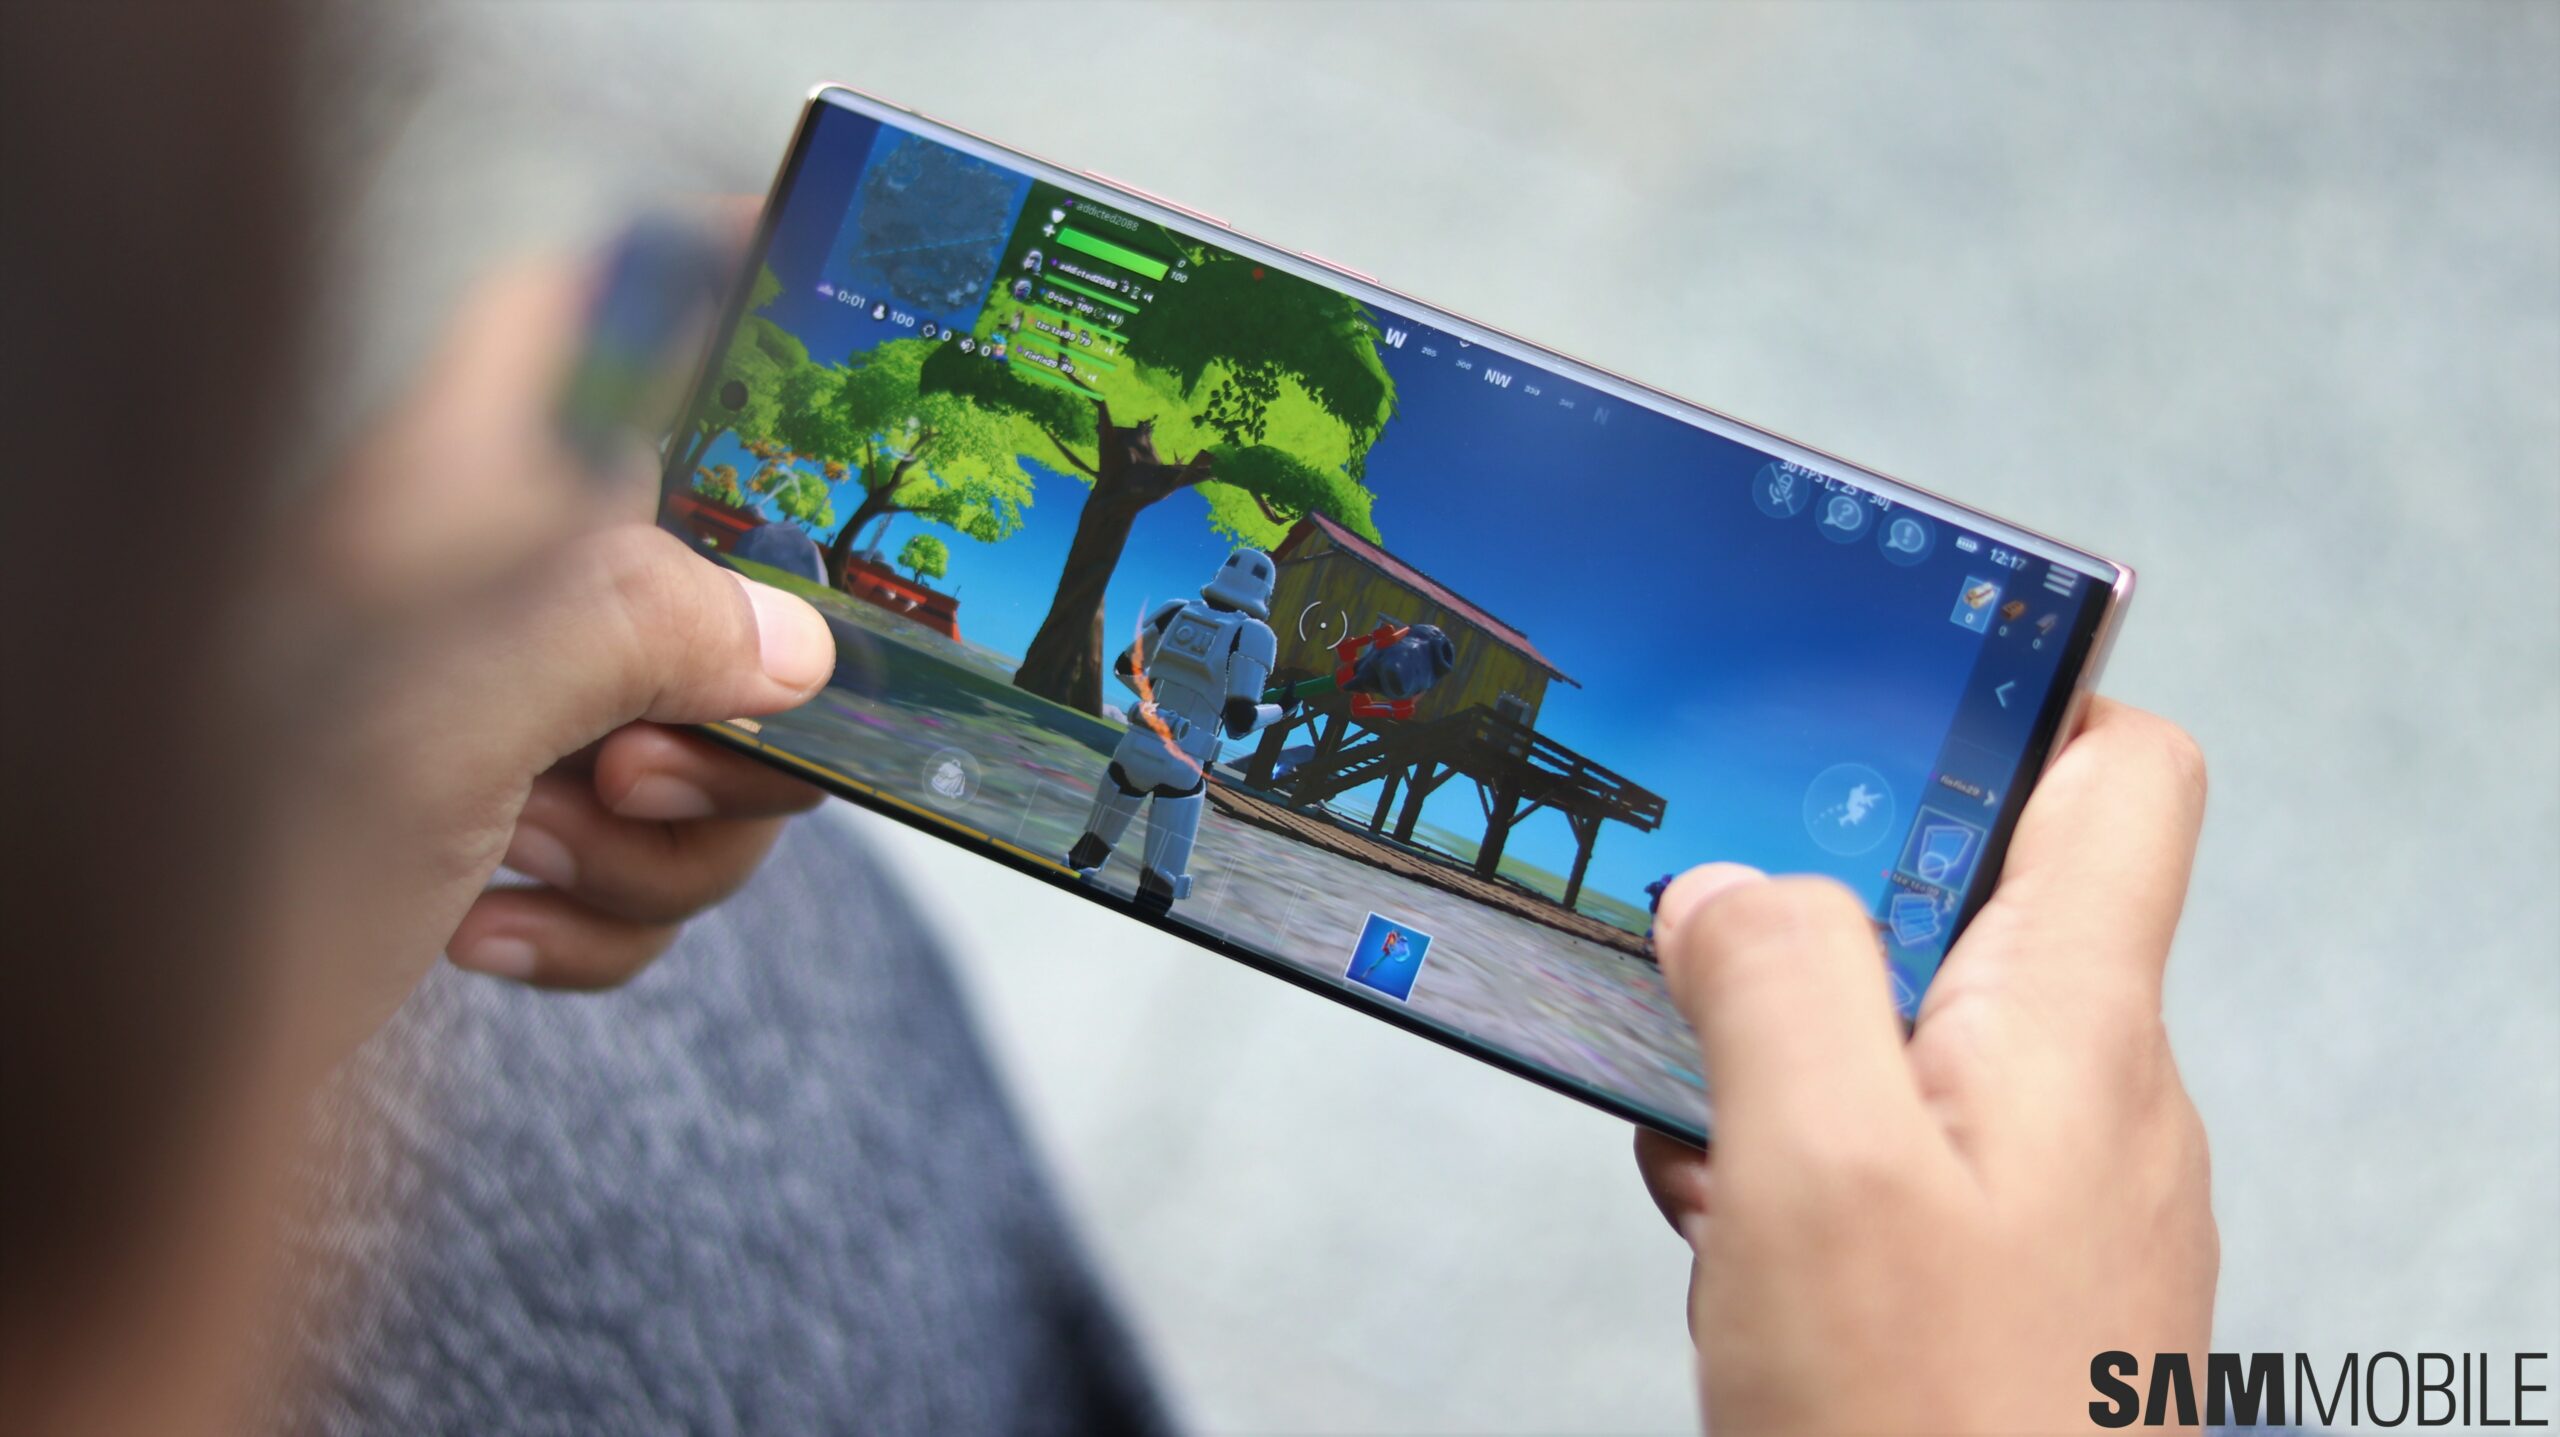 What Android devices is Fortnite available for